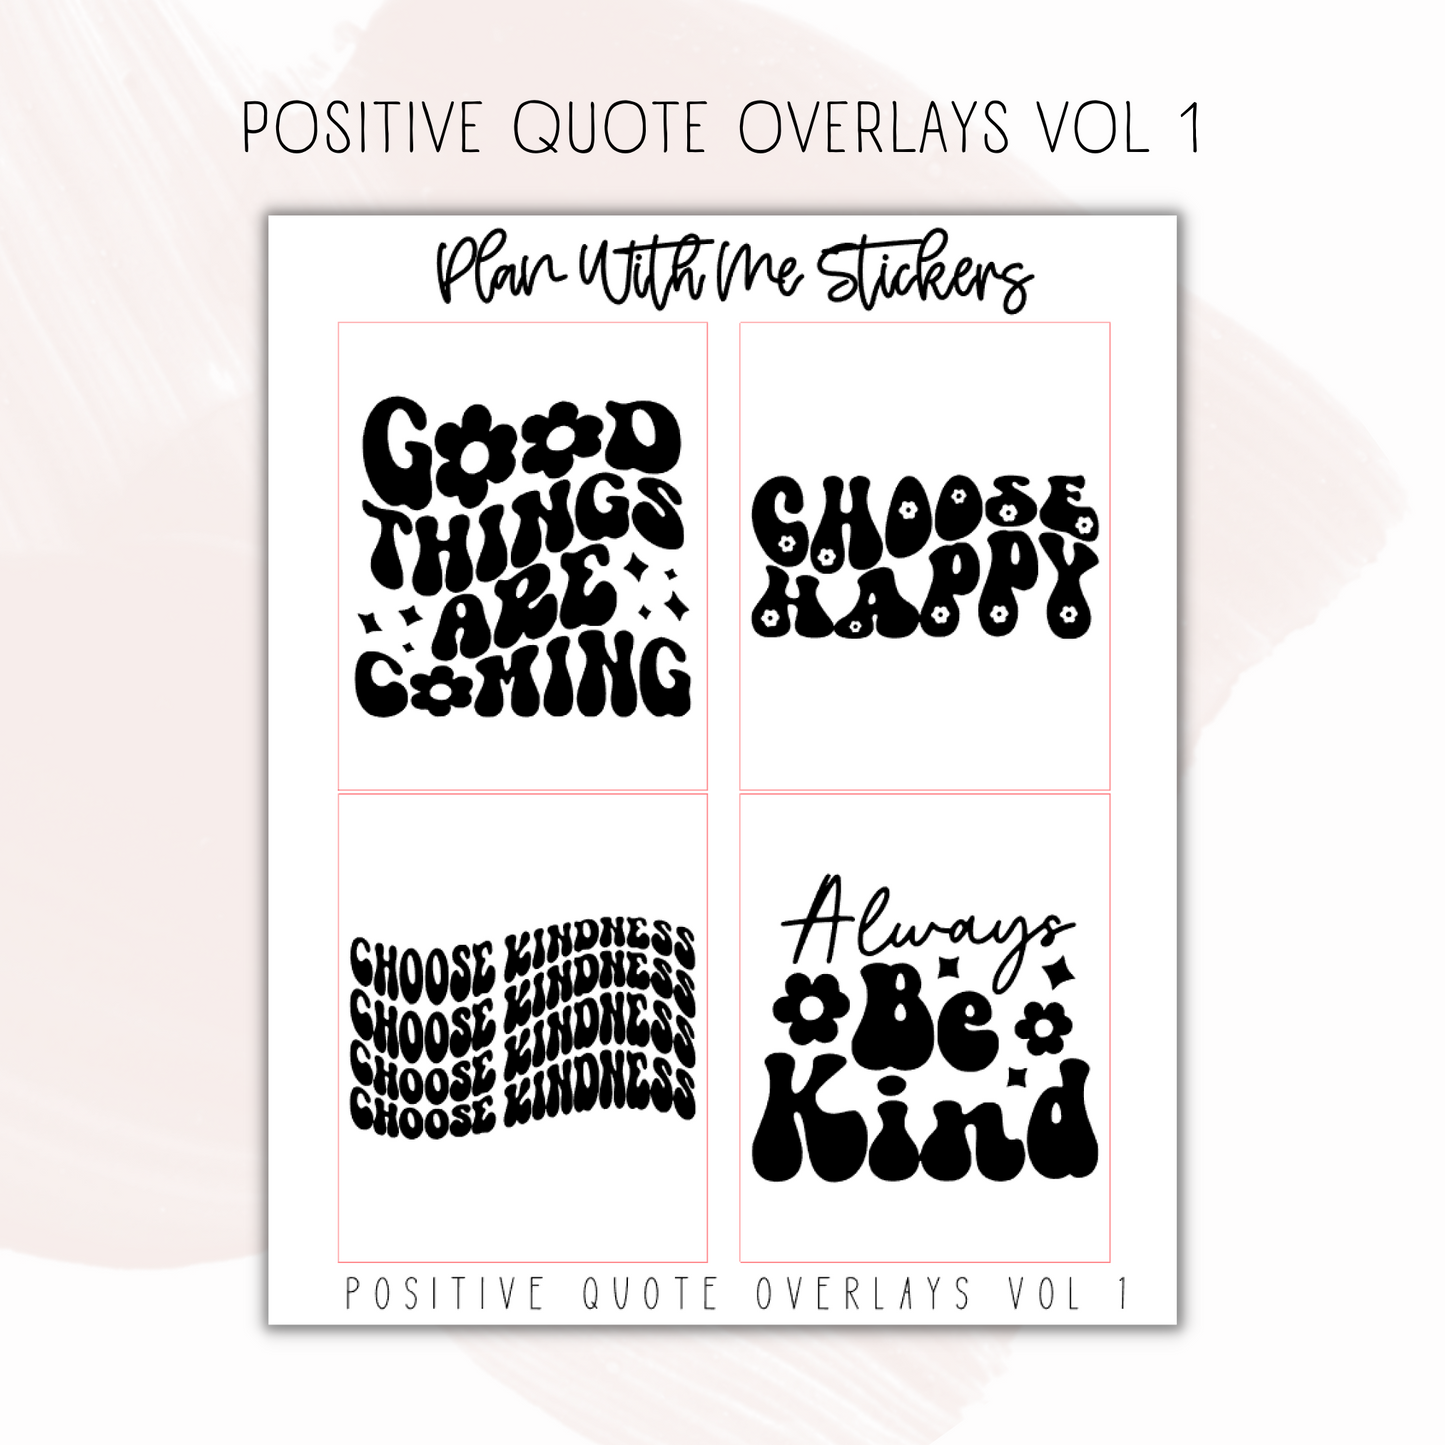 Positive Quote Overlays Vol 1